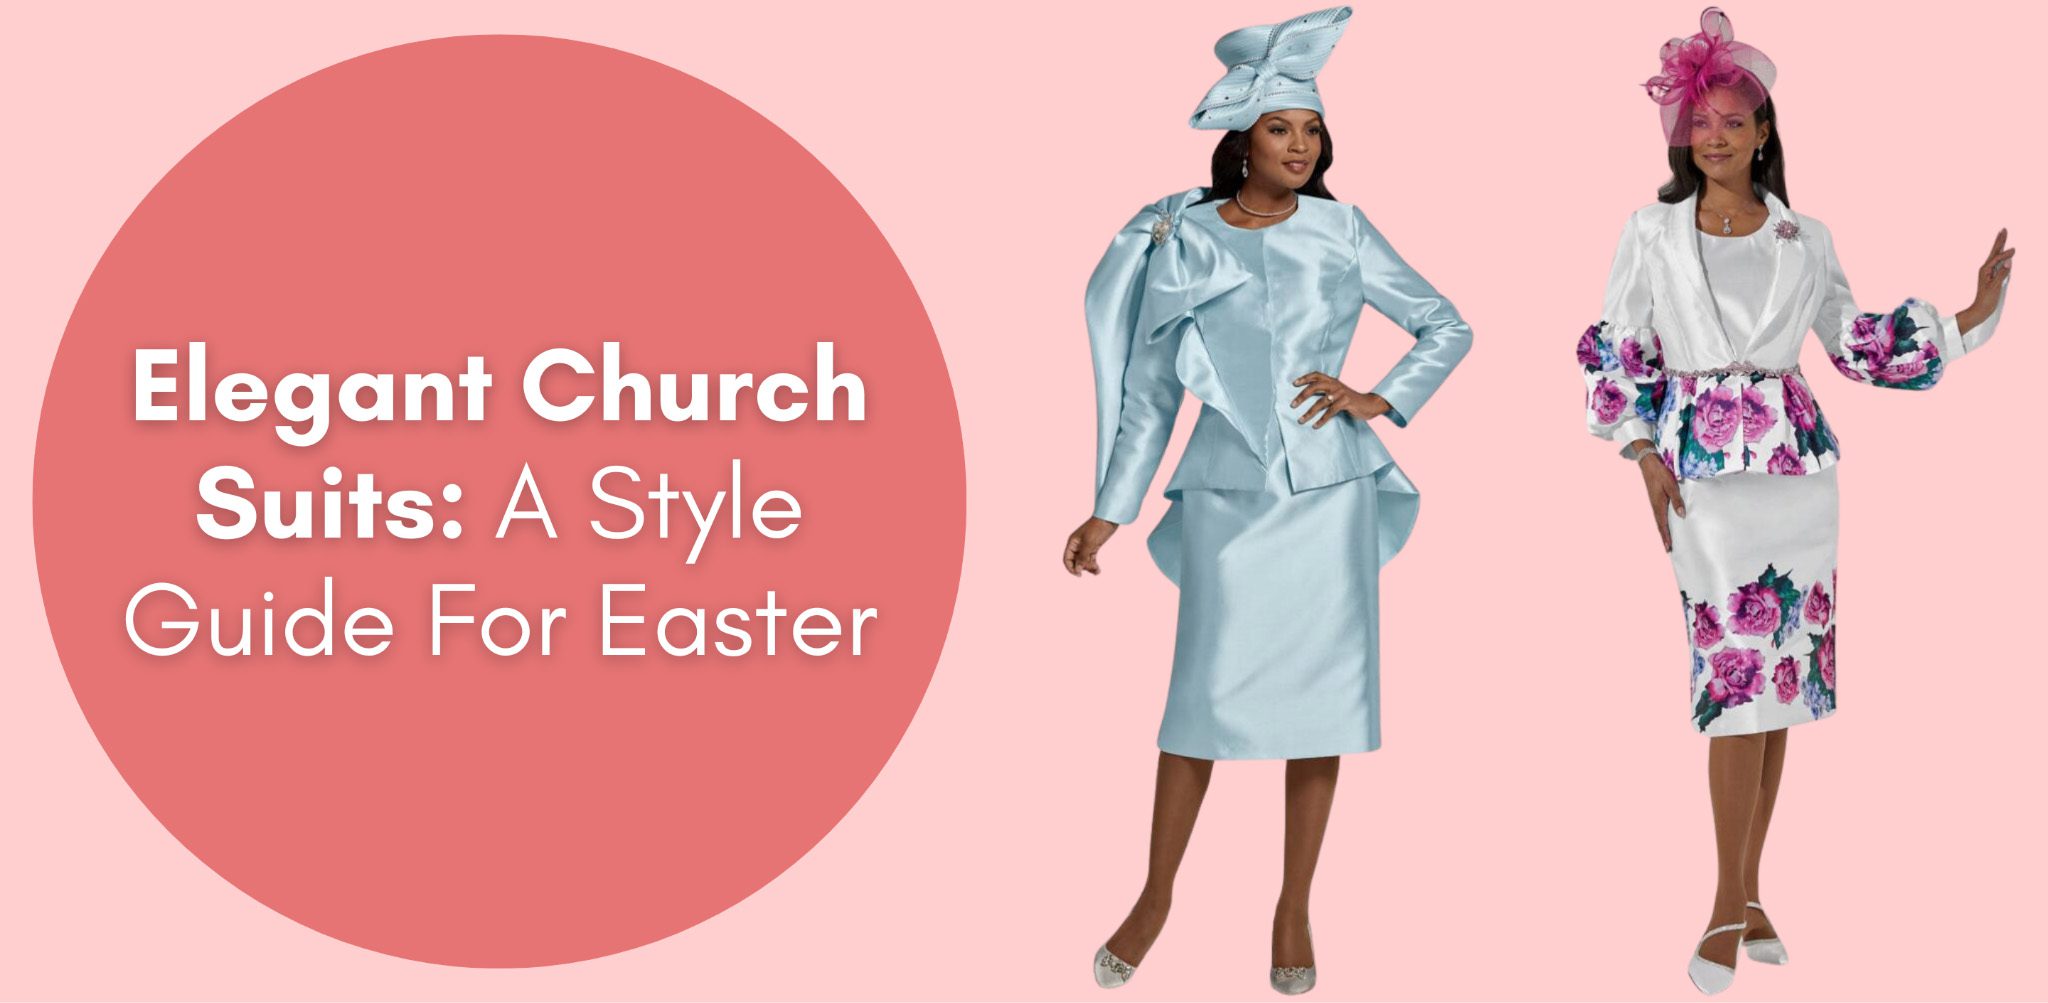 Elegant Church Suits: A Style Guide For Easter